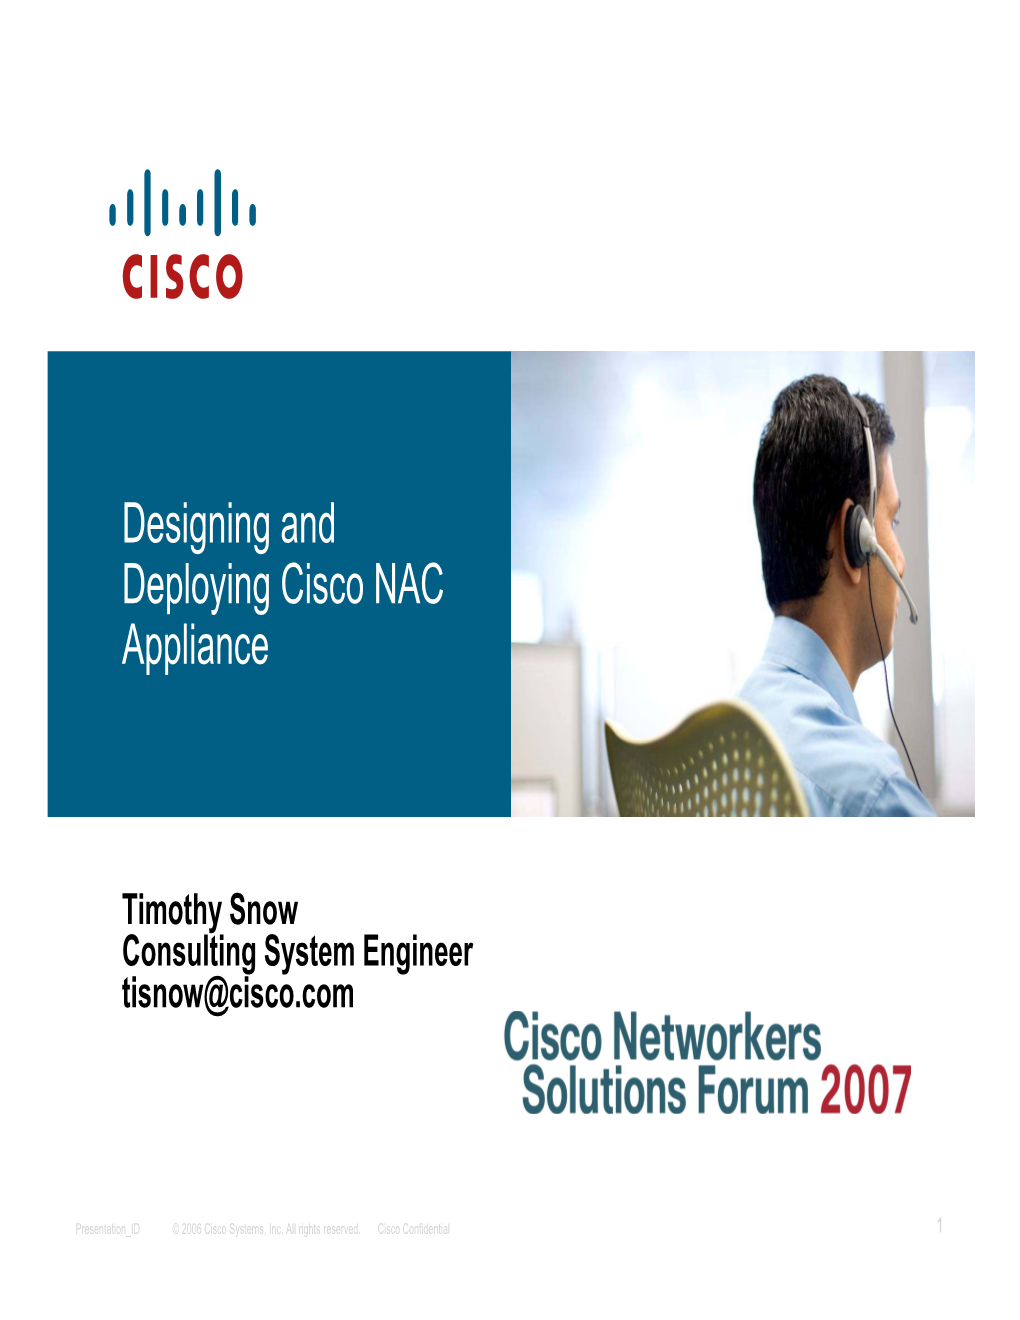 Designing and Deploying Cisco NAC Appliance